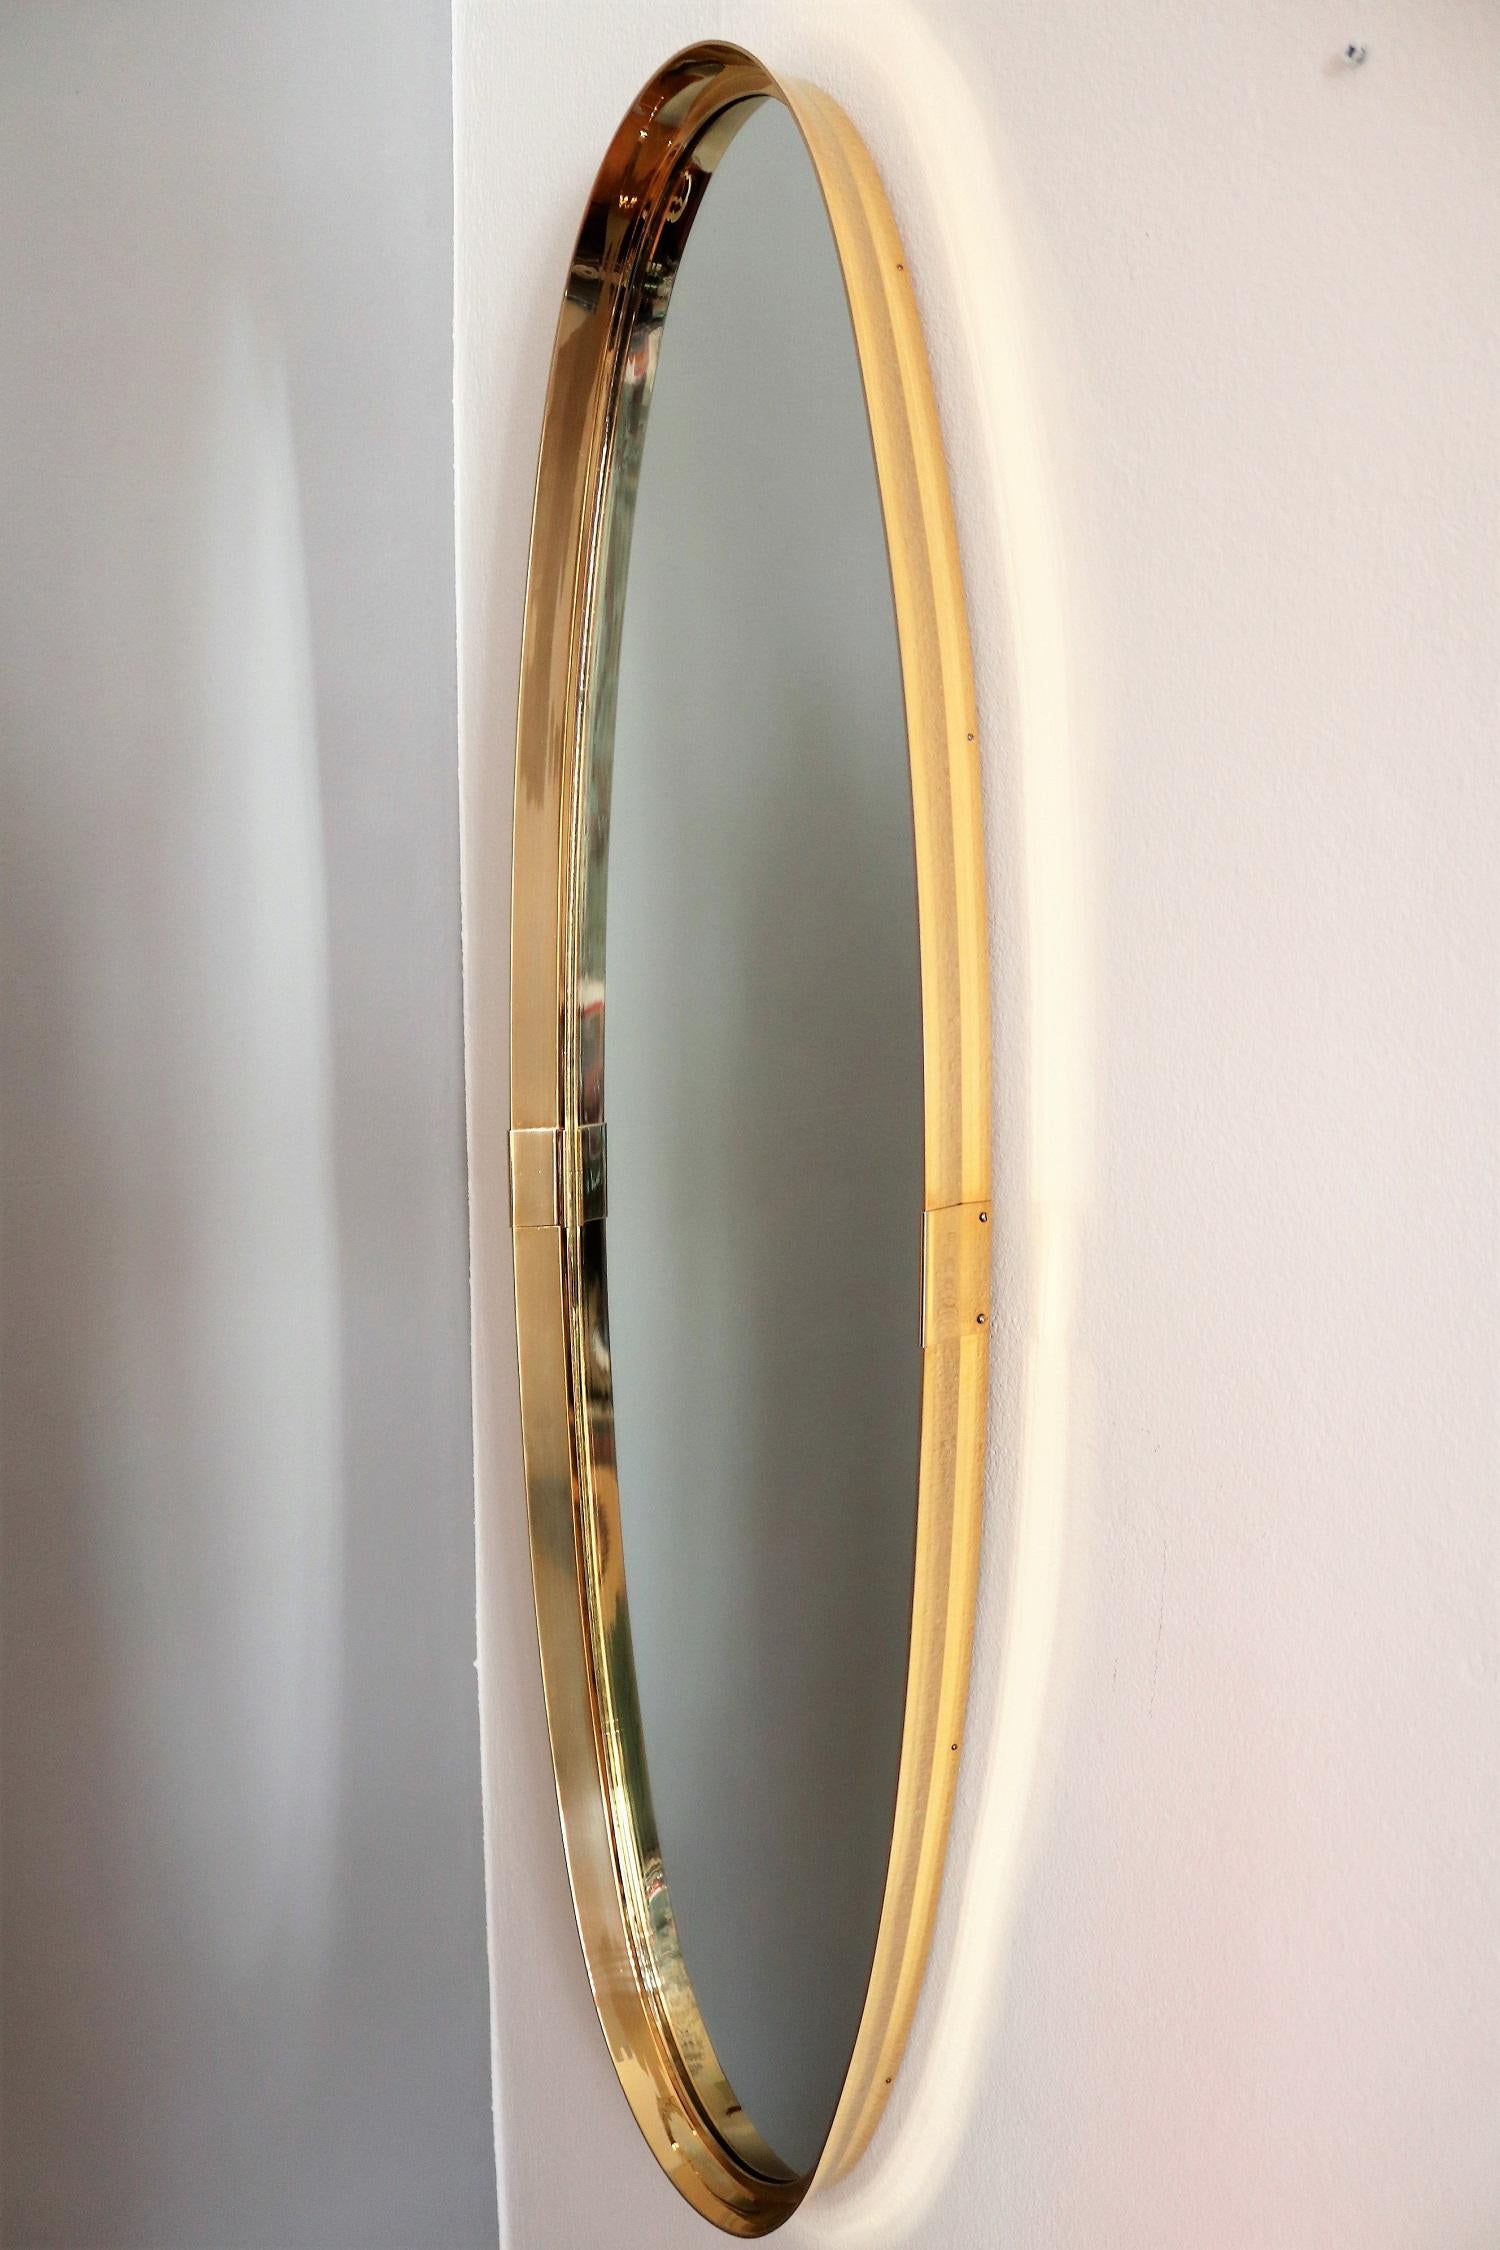 Big luxury wall mirror made of full brass large frame with shiny 24-karat gold plating and crystal glass.
Made by Vereinigte Werkstätten München, Germany, in the 1960s. With original manufacturers label.
This big mirror is in the original